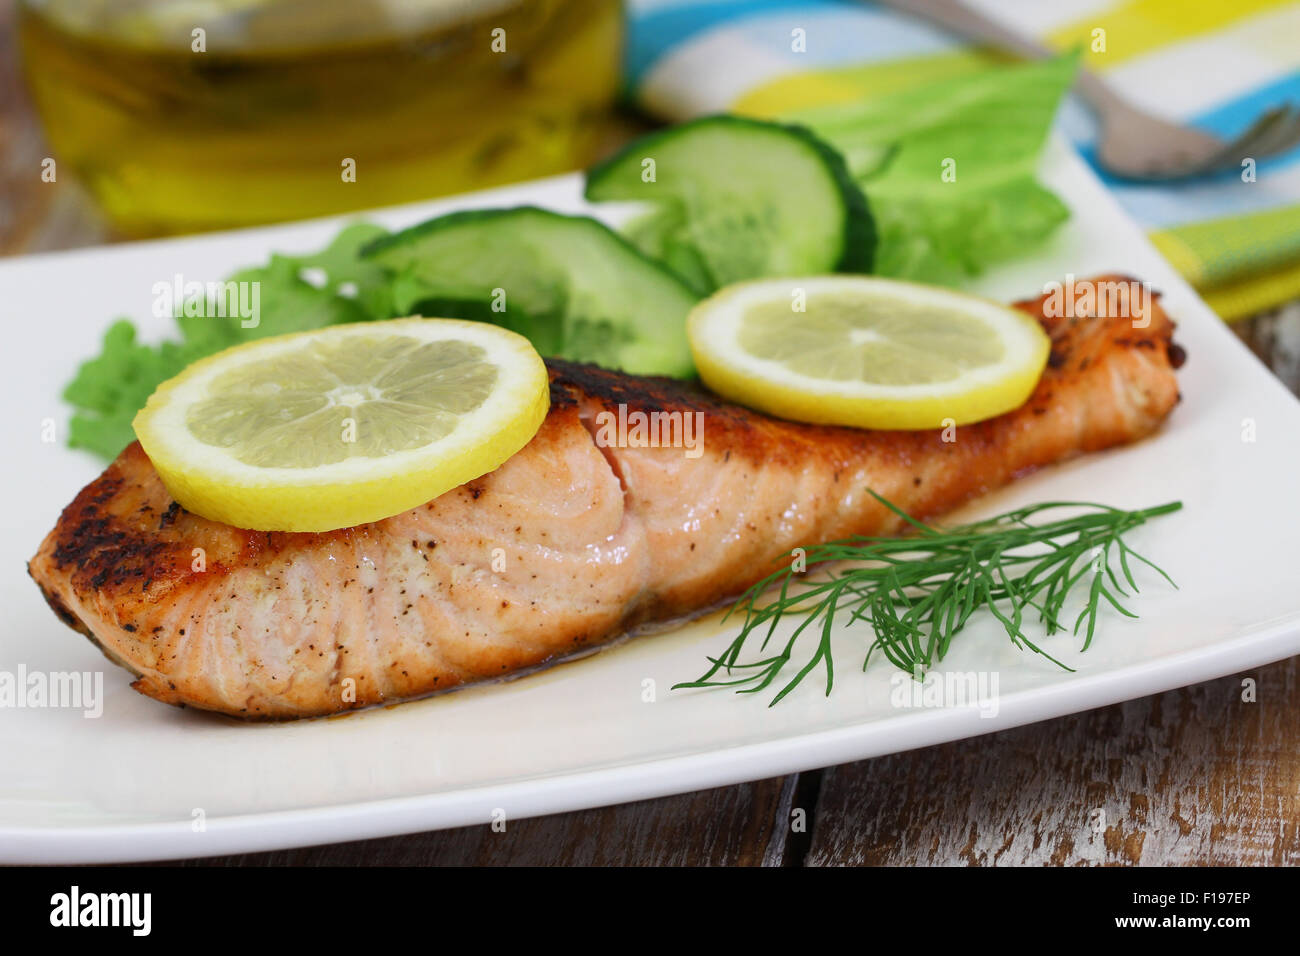 Grilled salmon fillet with lemon and fresh dill Stock Photo